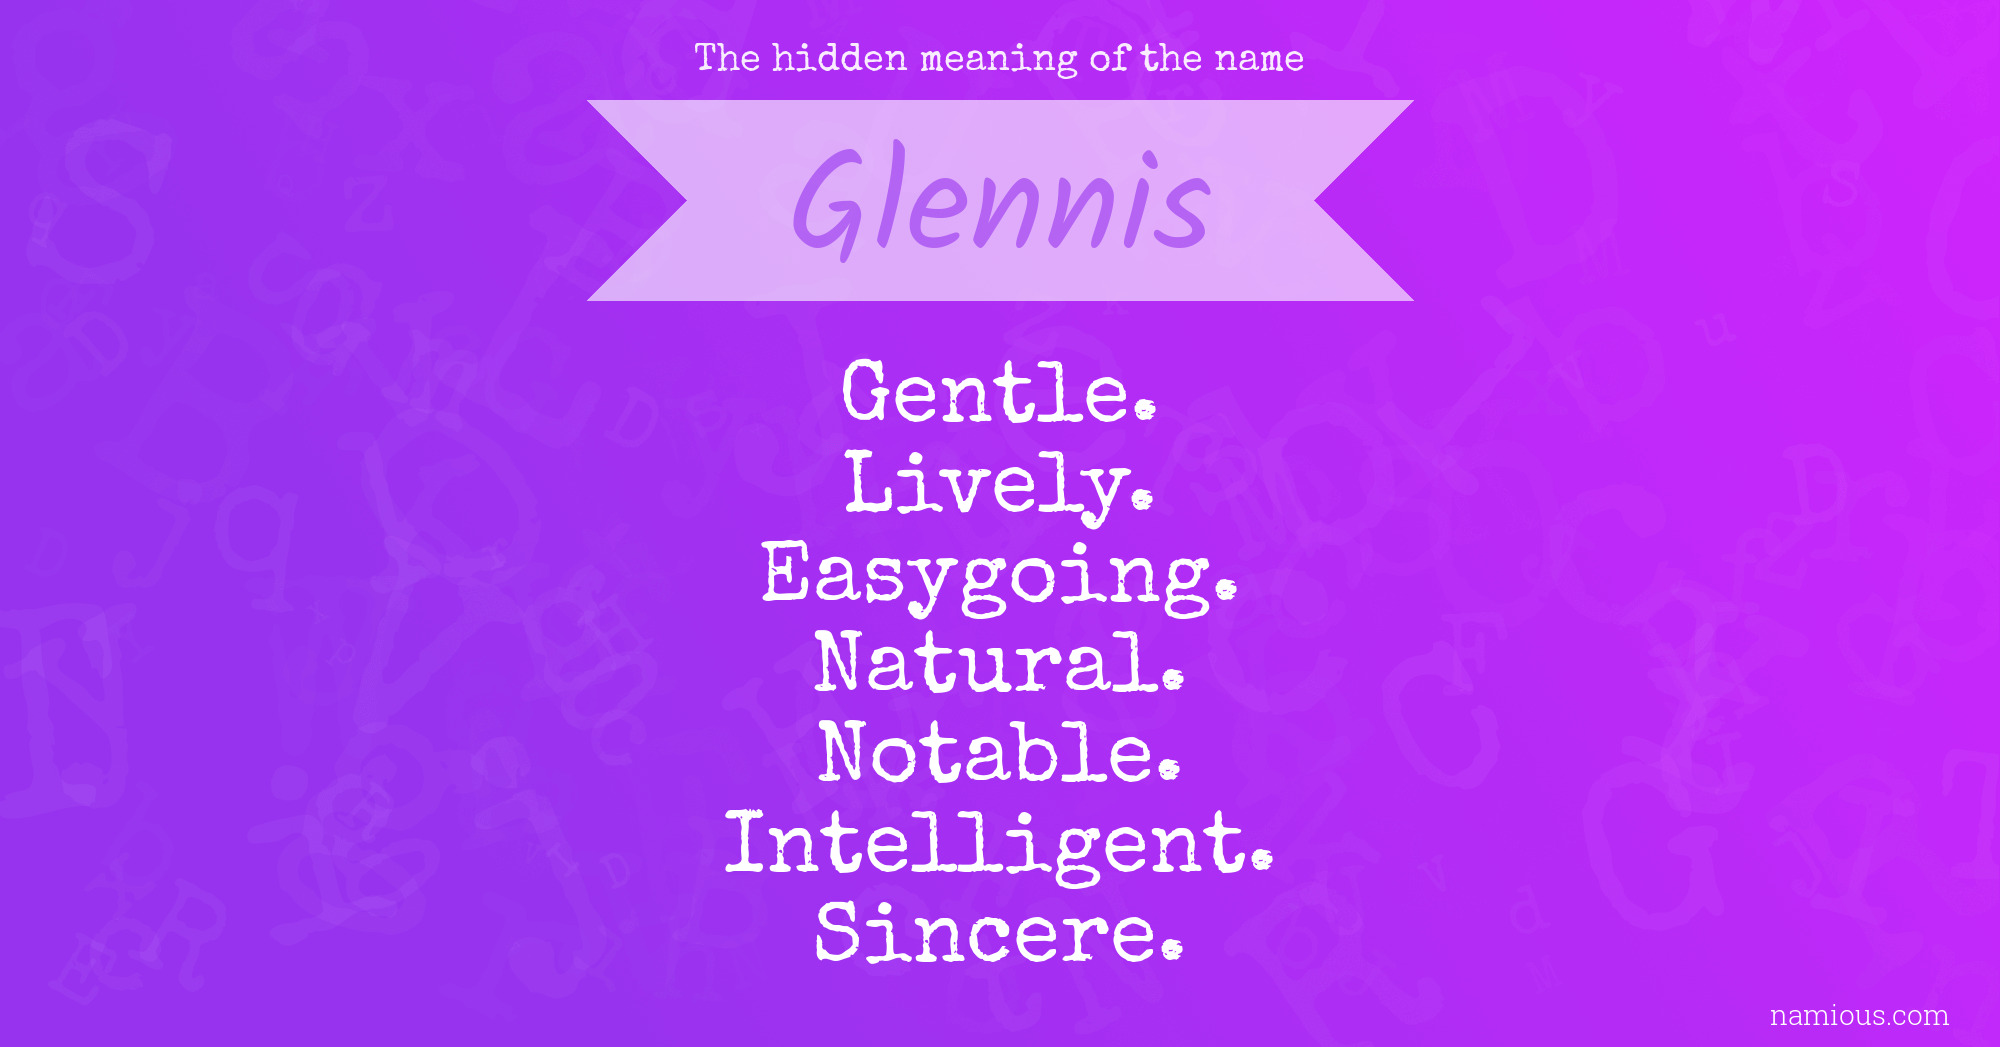 The hidden meaning of the name Glennis